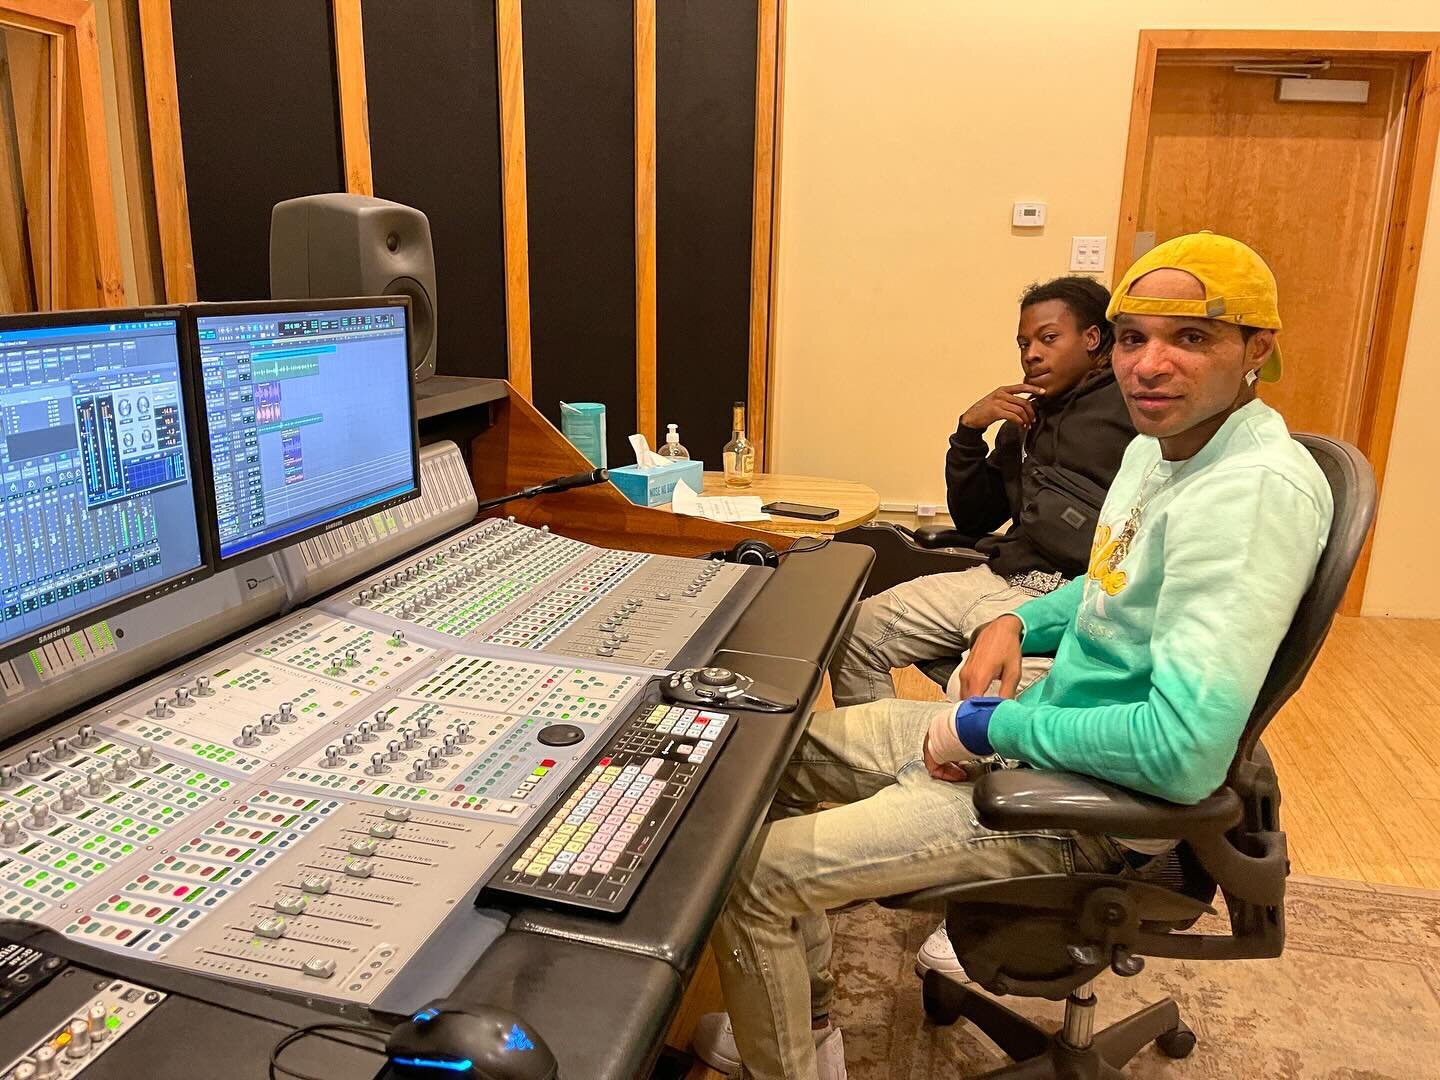 Philly rapper RedSox Jones was in recently recording vocals for a few new songs.